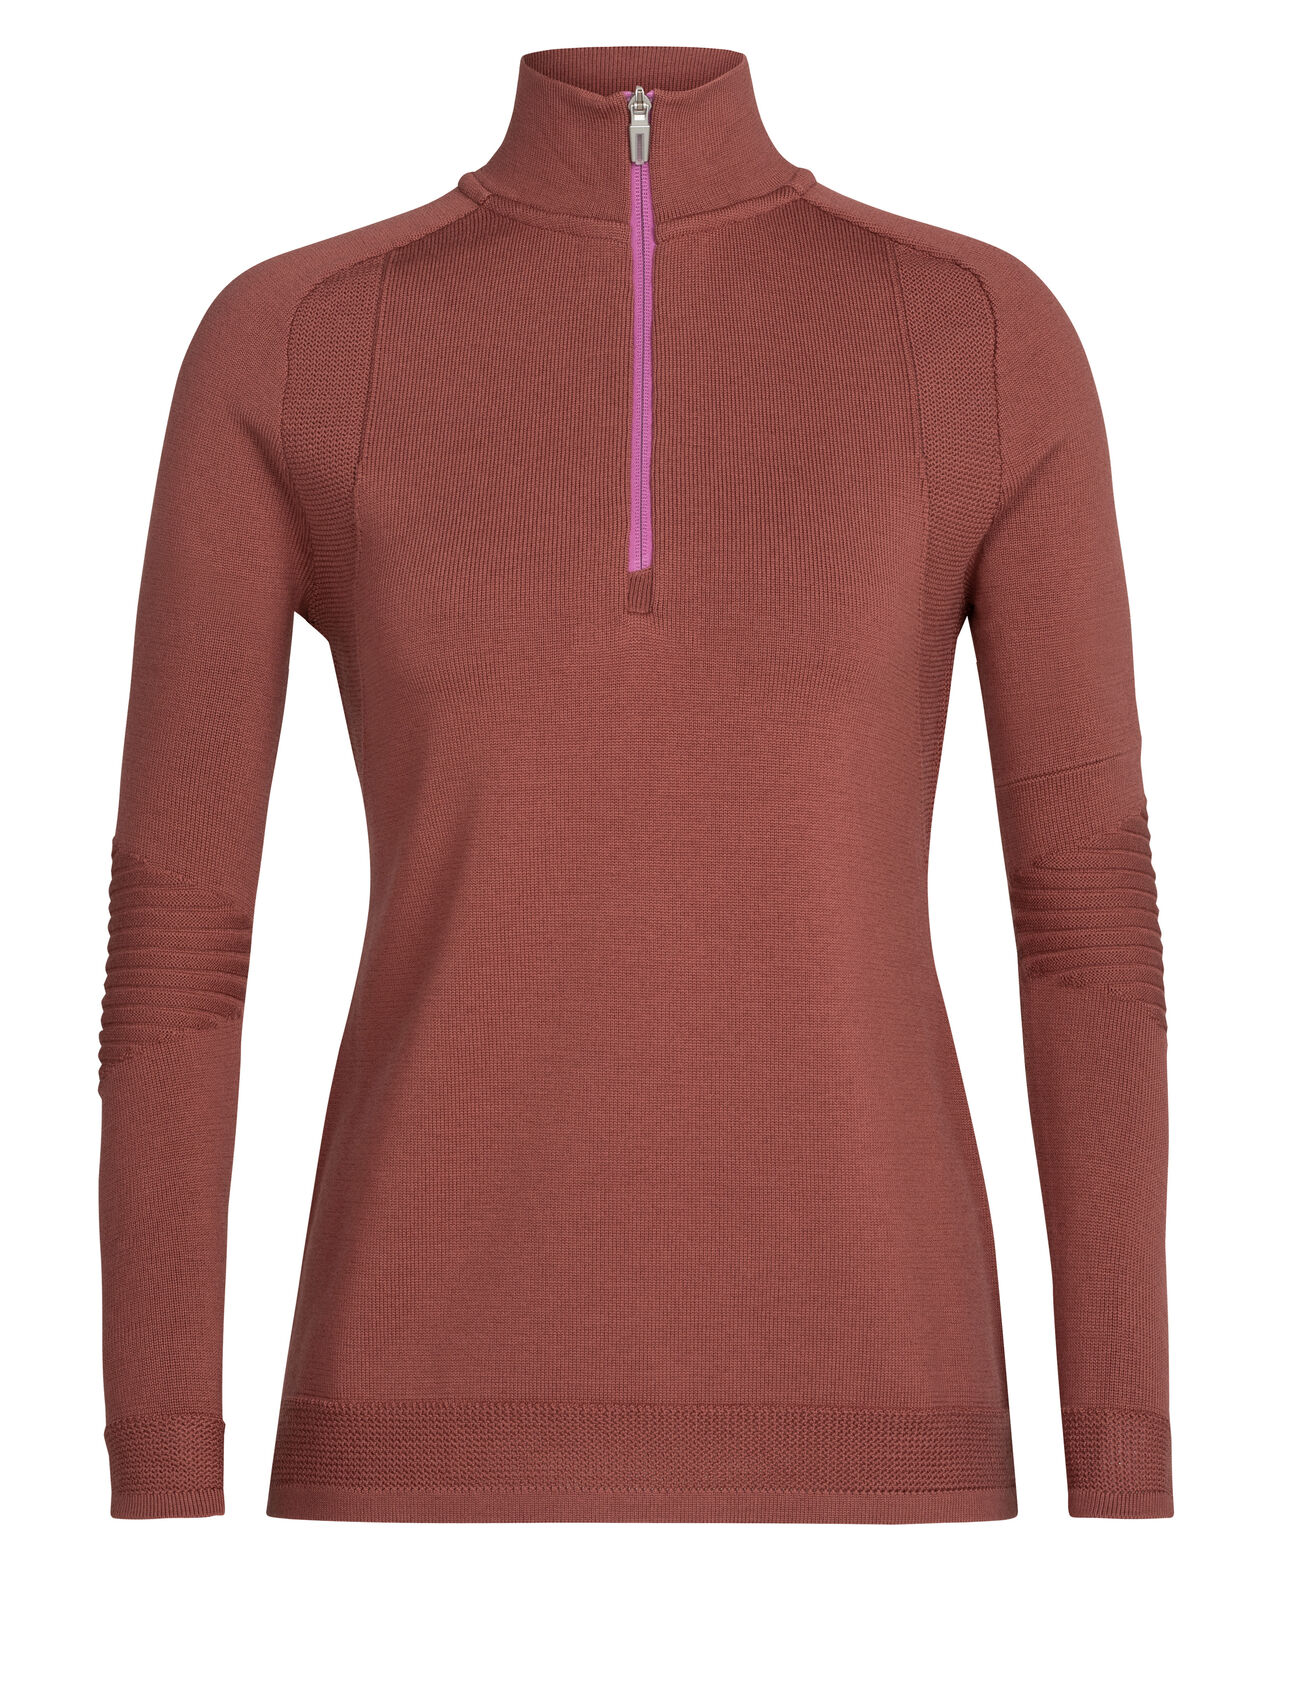 Womens ZoneKnit™ Merino Long Sleeve Half Zip A versatile, body-mapped zip-neck top that’s ideal for high-output mountain adventures, the ZoneKnit™Long Sleeve Half Zip features 100% merino wool for all-natural warmth and temperature regulation.